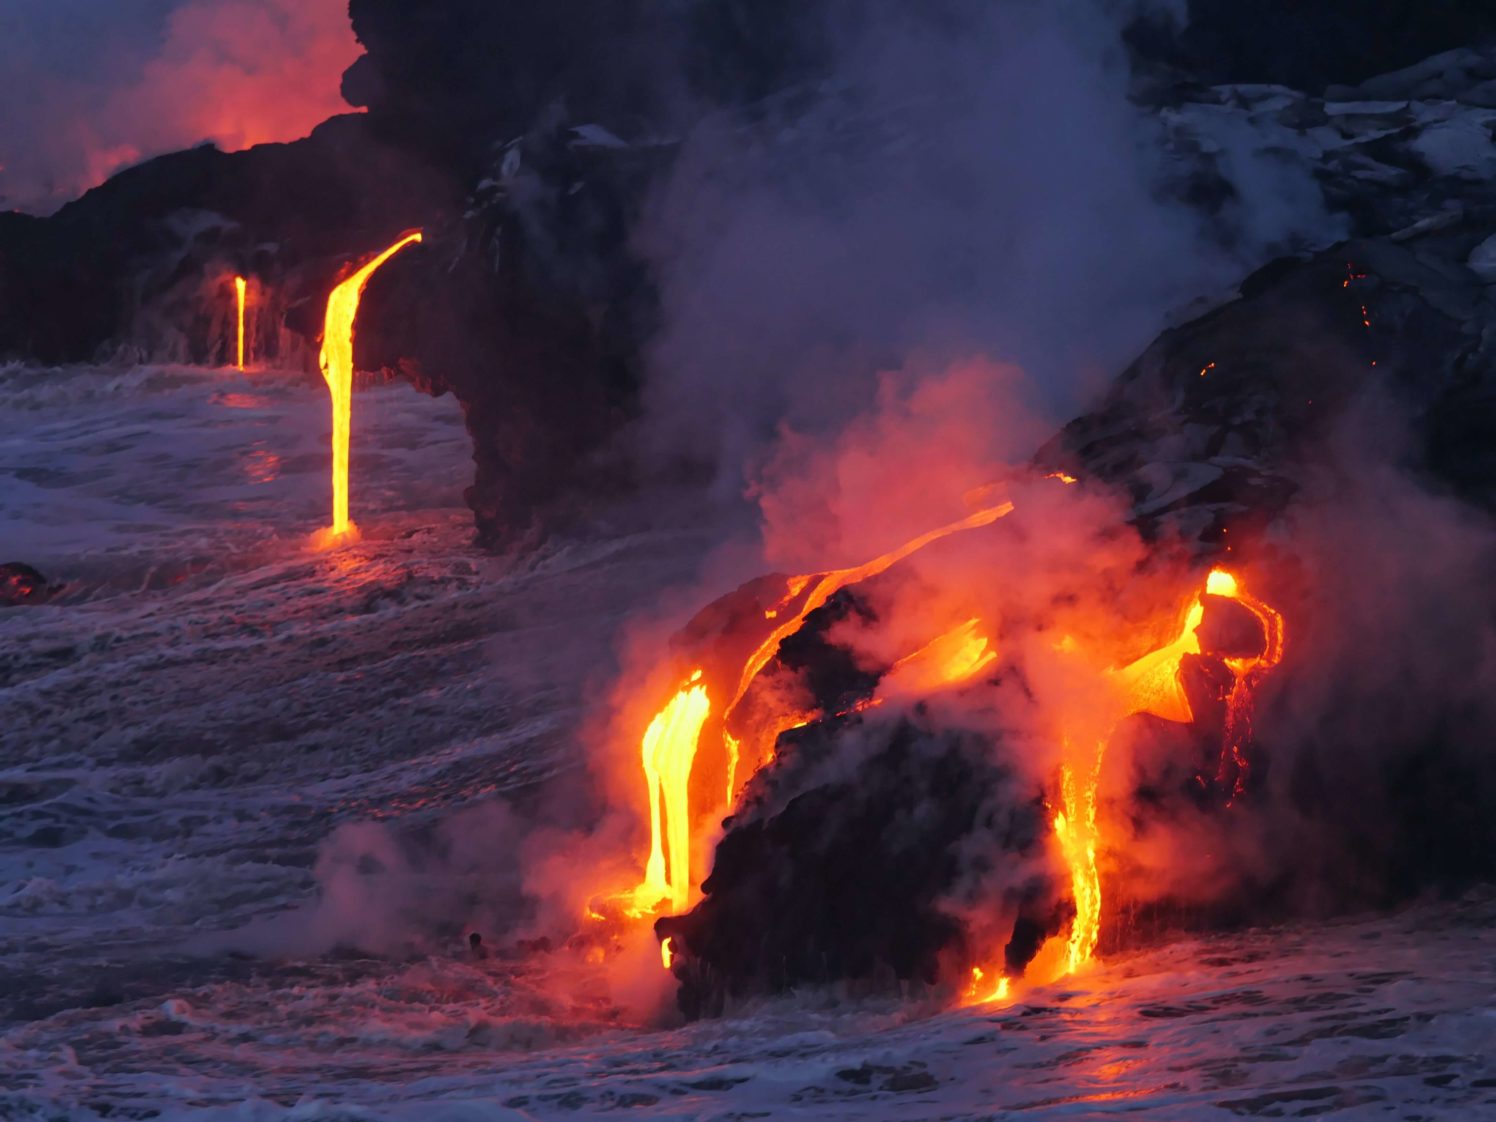 Kilauea Volcano: A Must-See Place in Hawaii